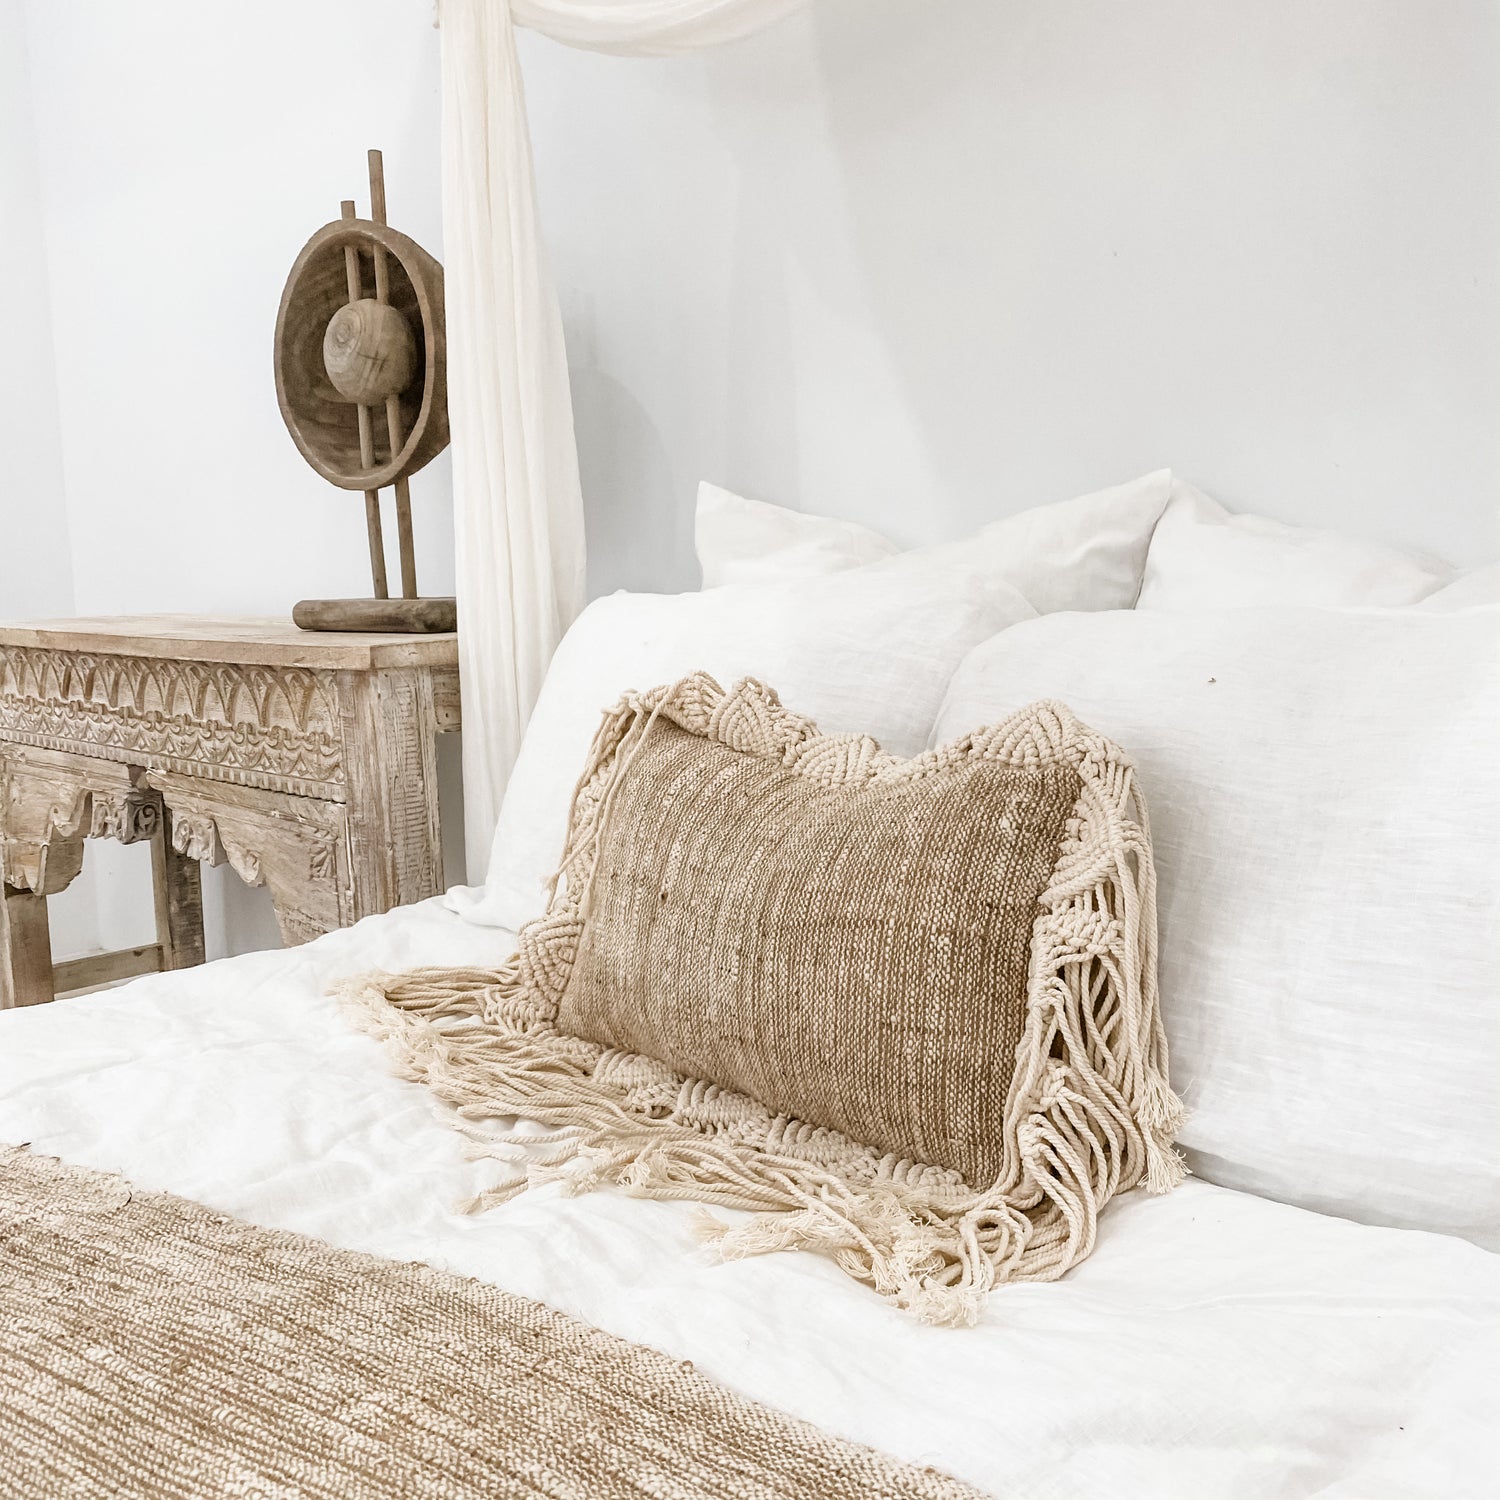 Summer Breeze Cushion featuring natural cotton and jute base with macrame fringe